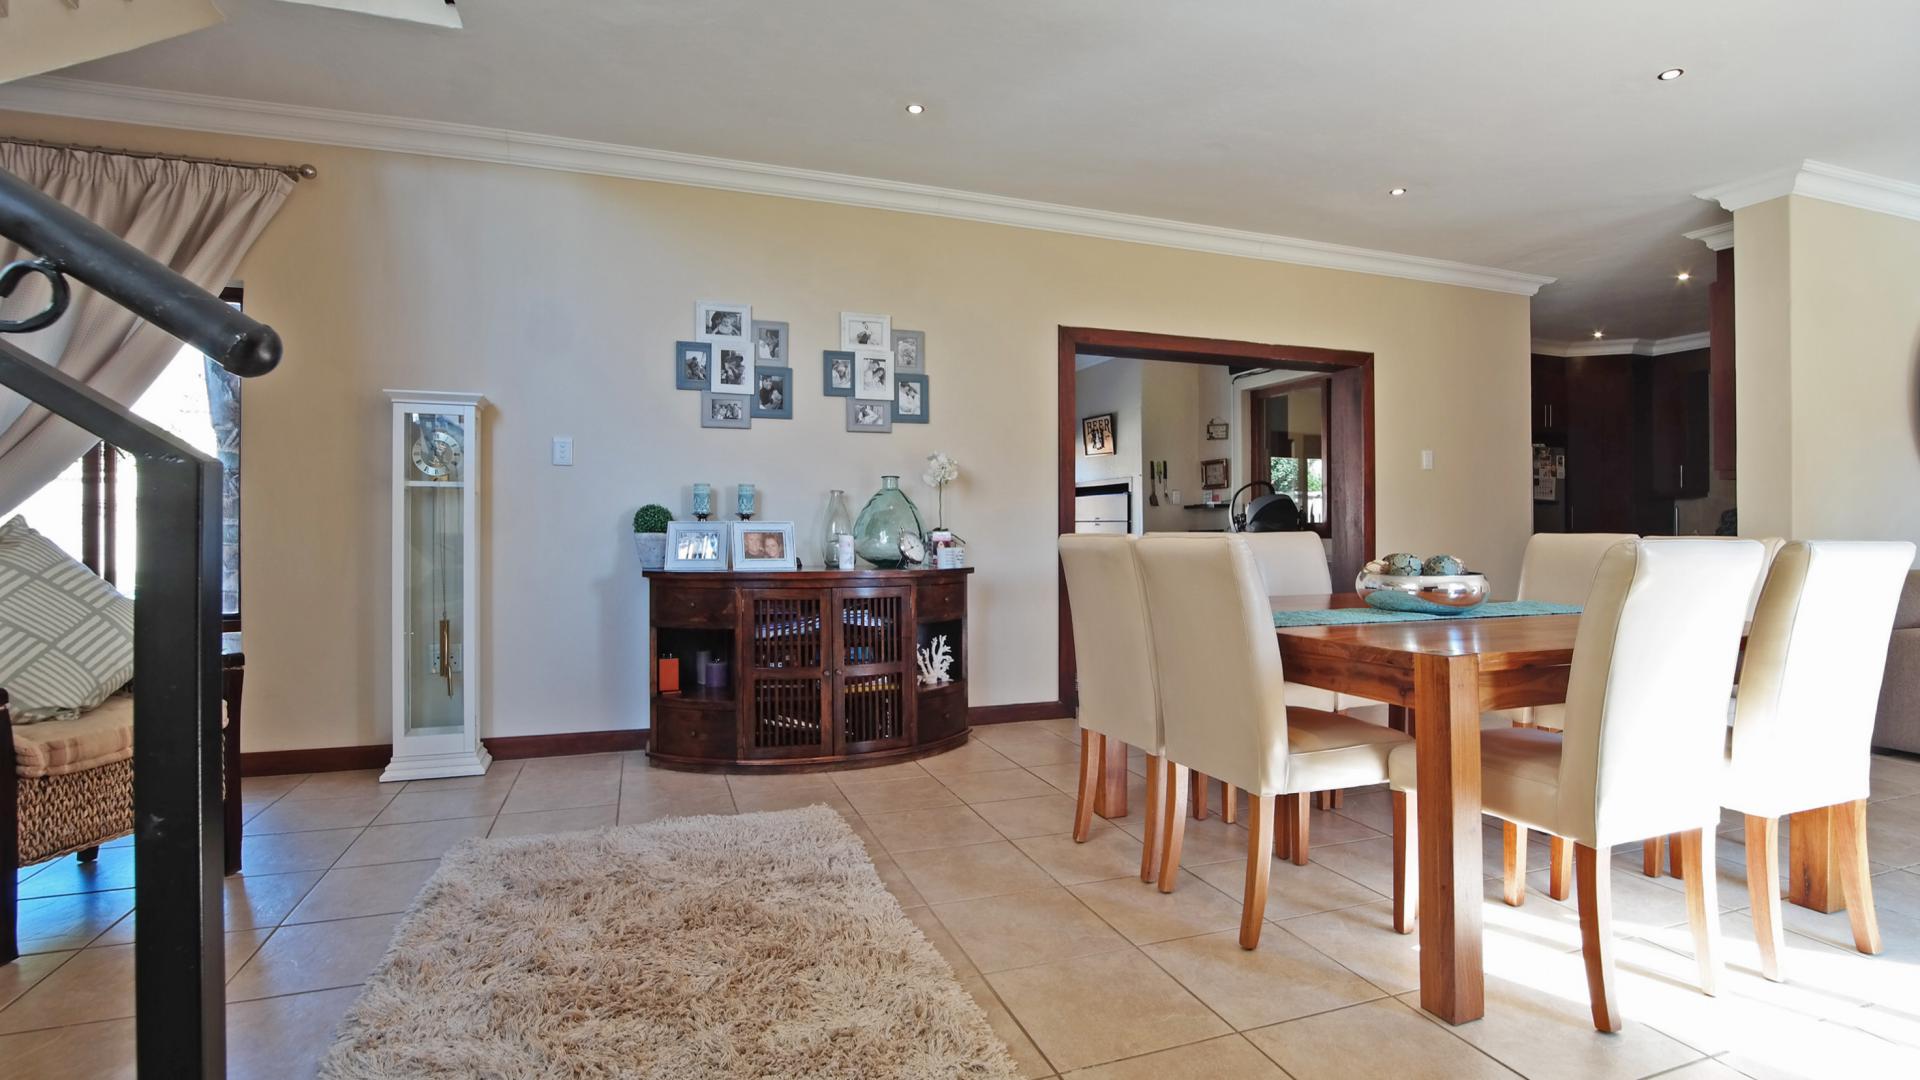 Dining Room - 31 square meters of property in Willow Acres Estate